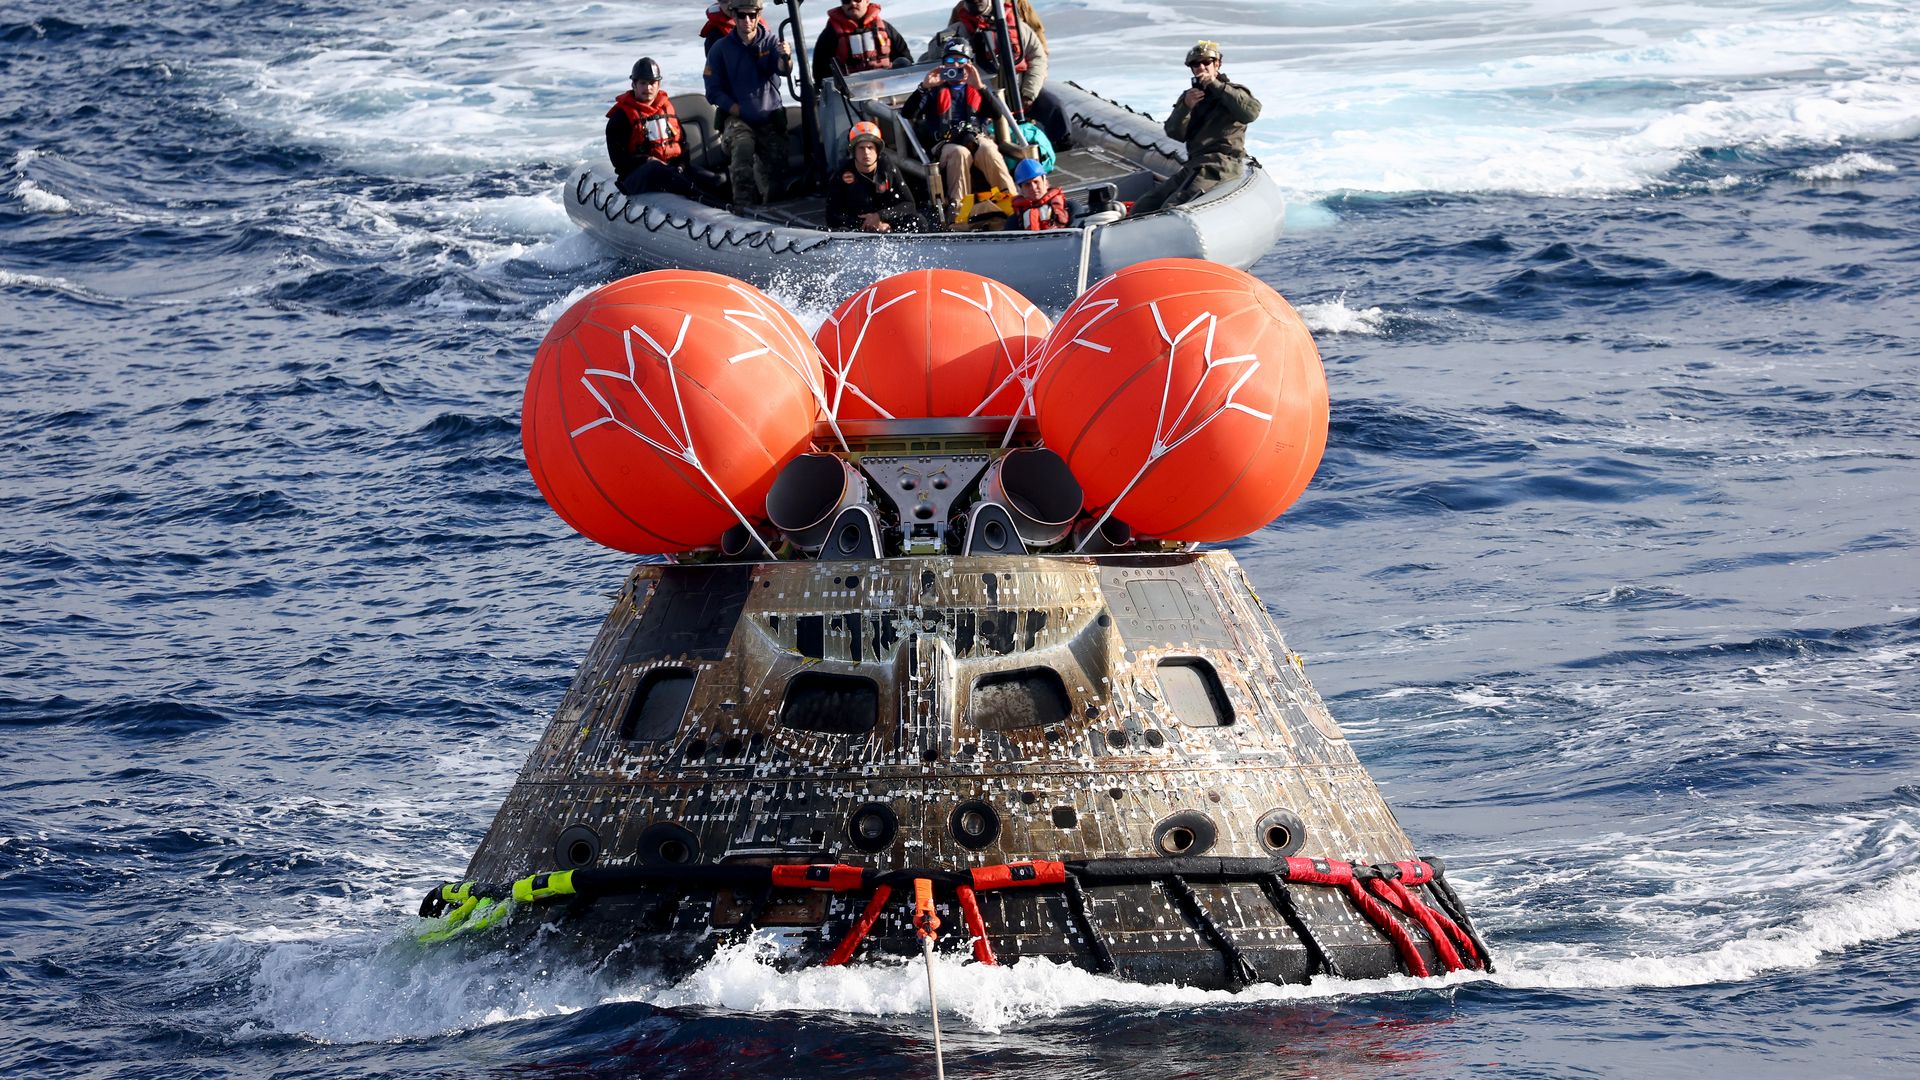 NASA's Orion Capsule is drawn to the well deck of the U.S.S. Portland.